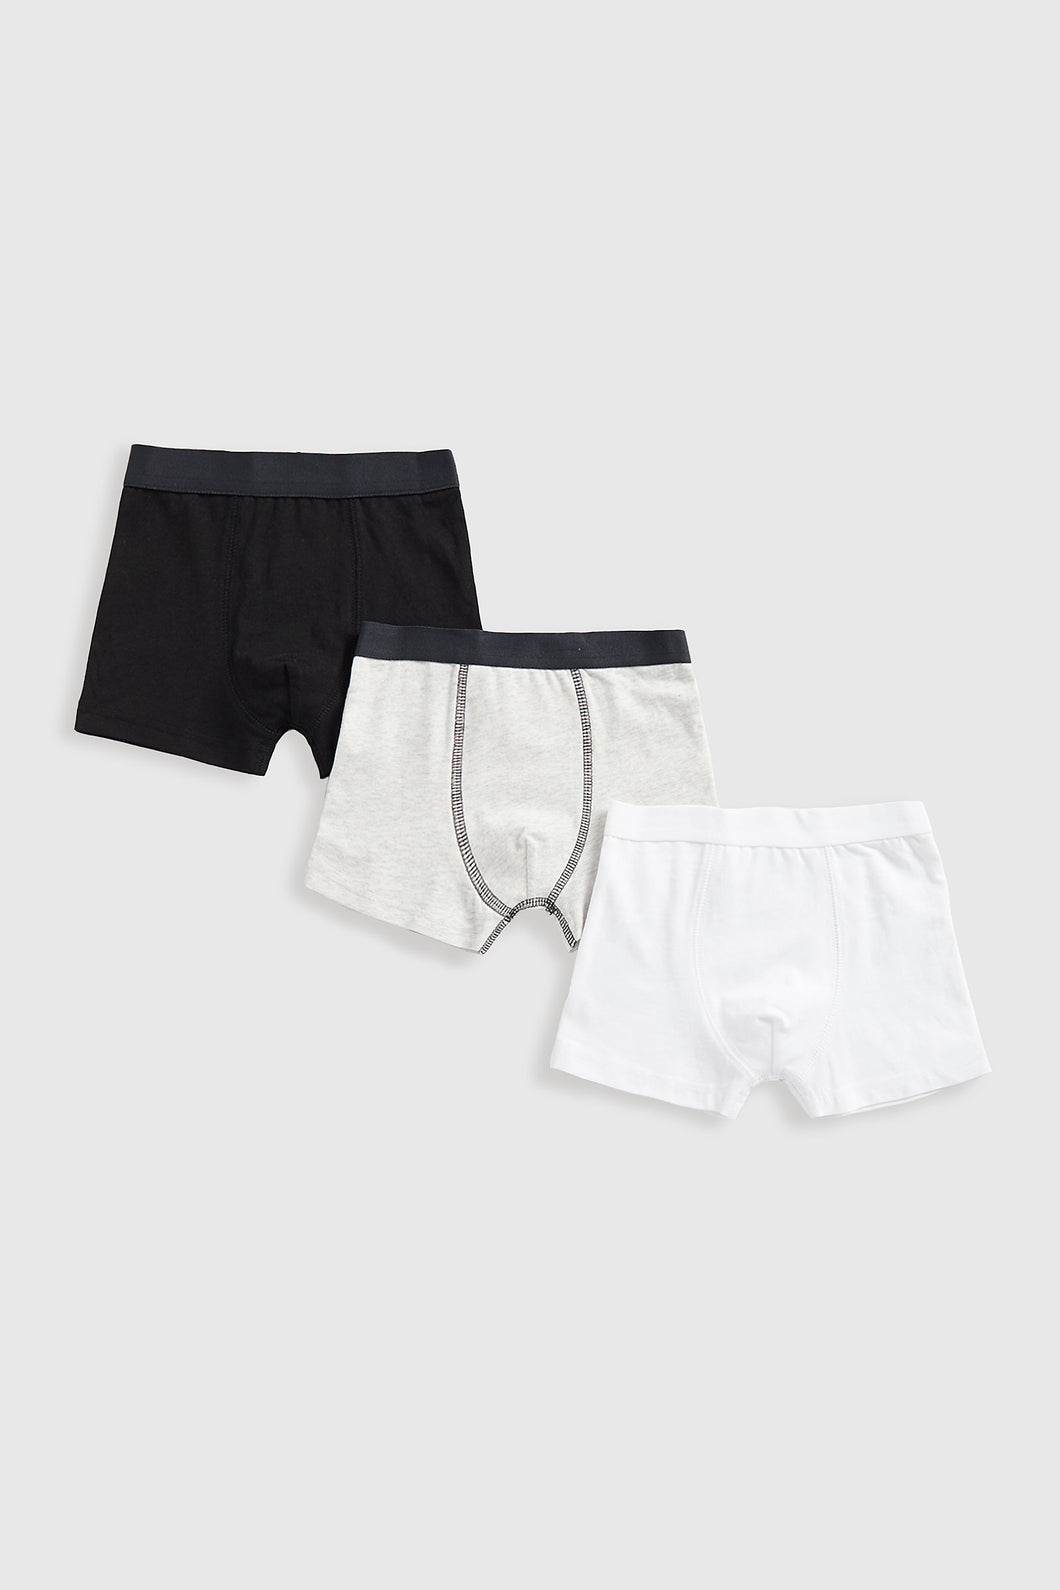 Mothercare Black, Grey, And White Trunk Briefs - 3 Pack